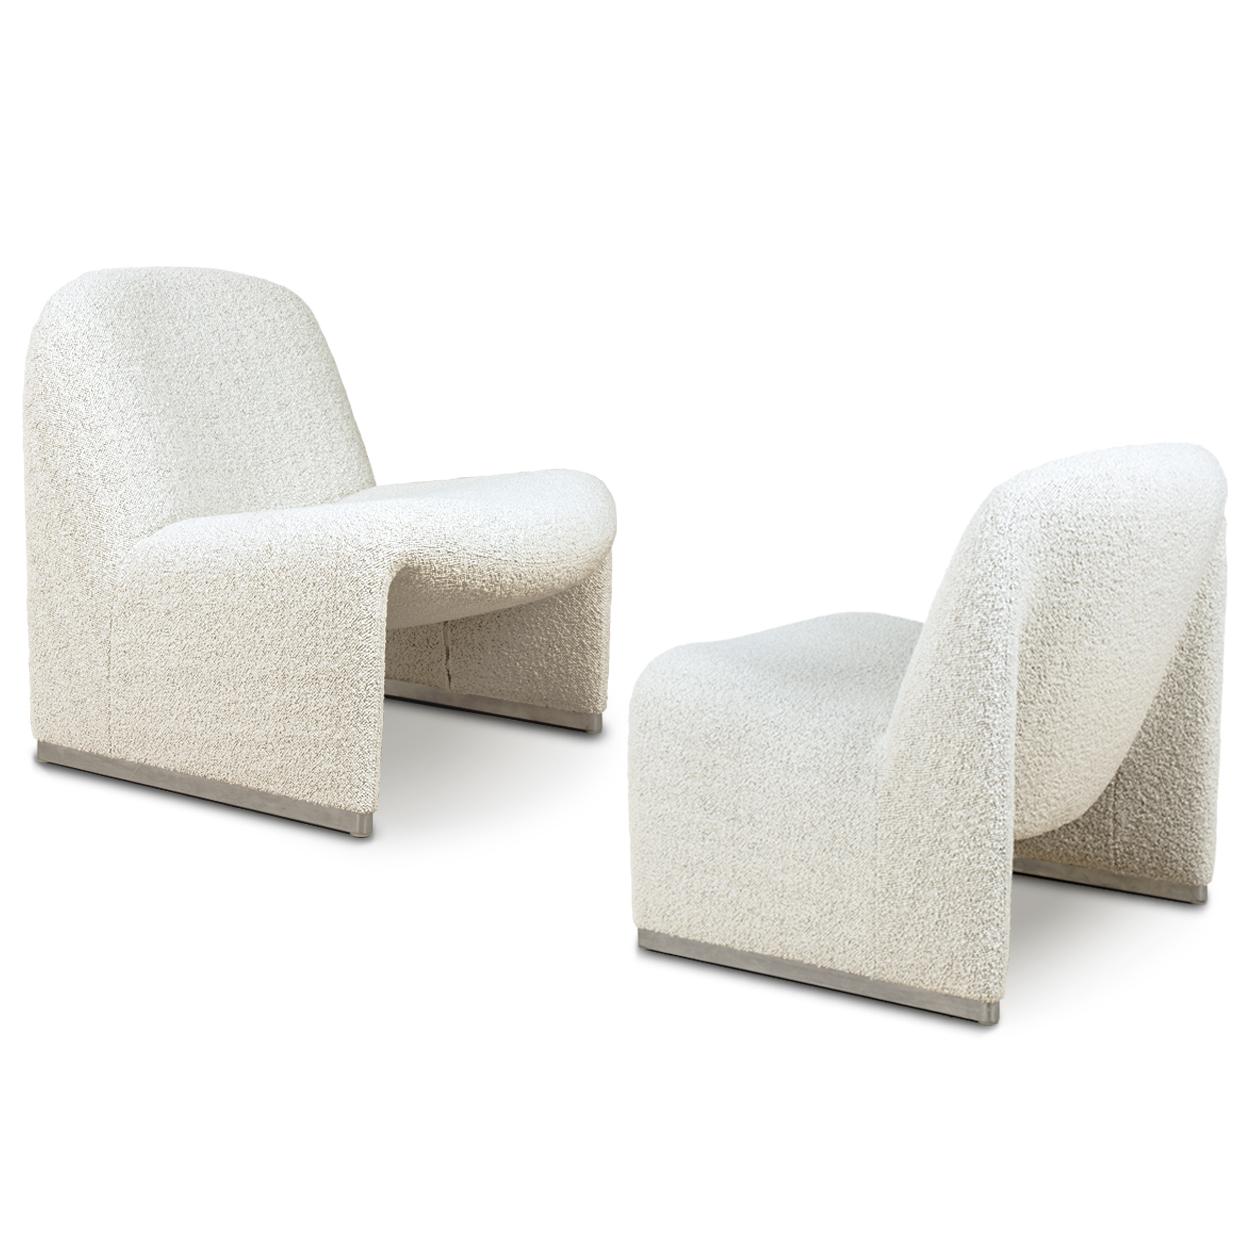 Late 20th Century Alky Piretti Chairs, New Upholstered with High-end Fabric by Dedar, Italy